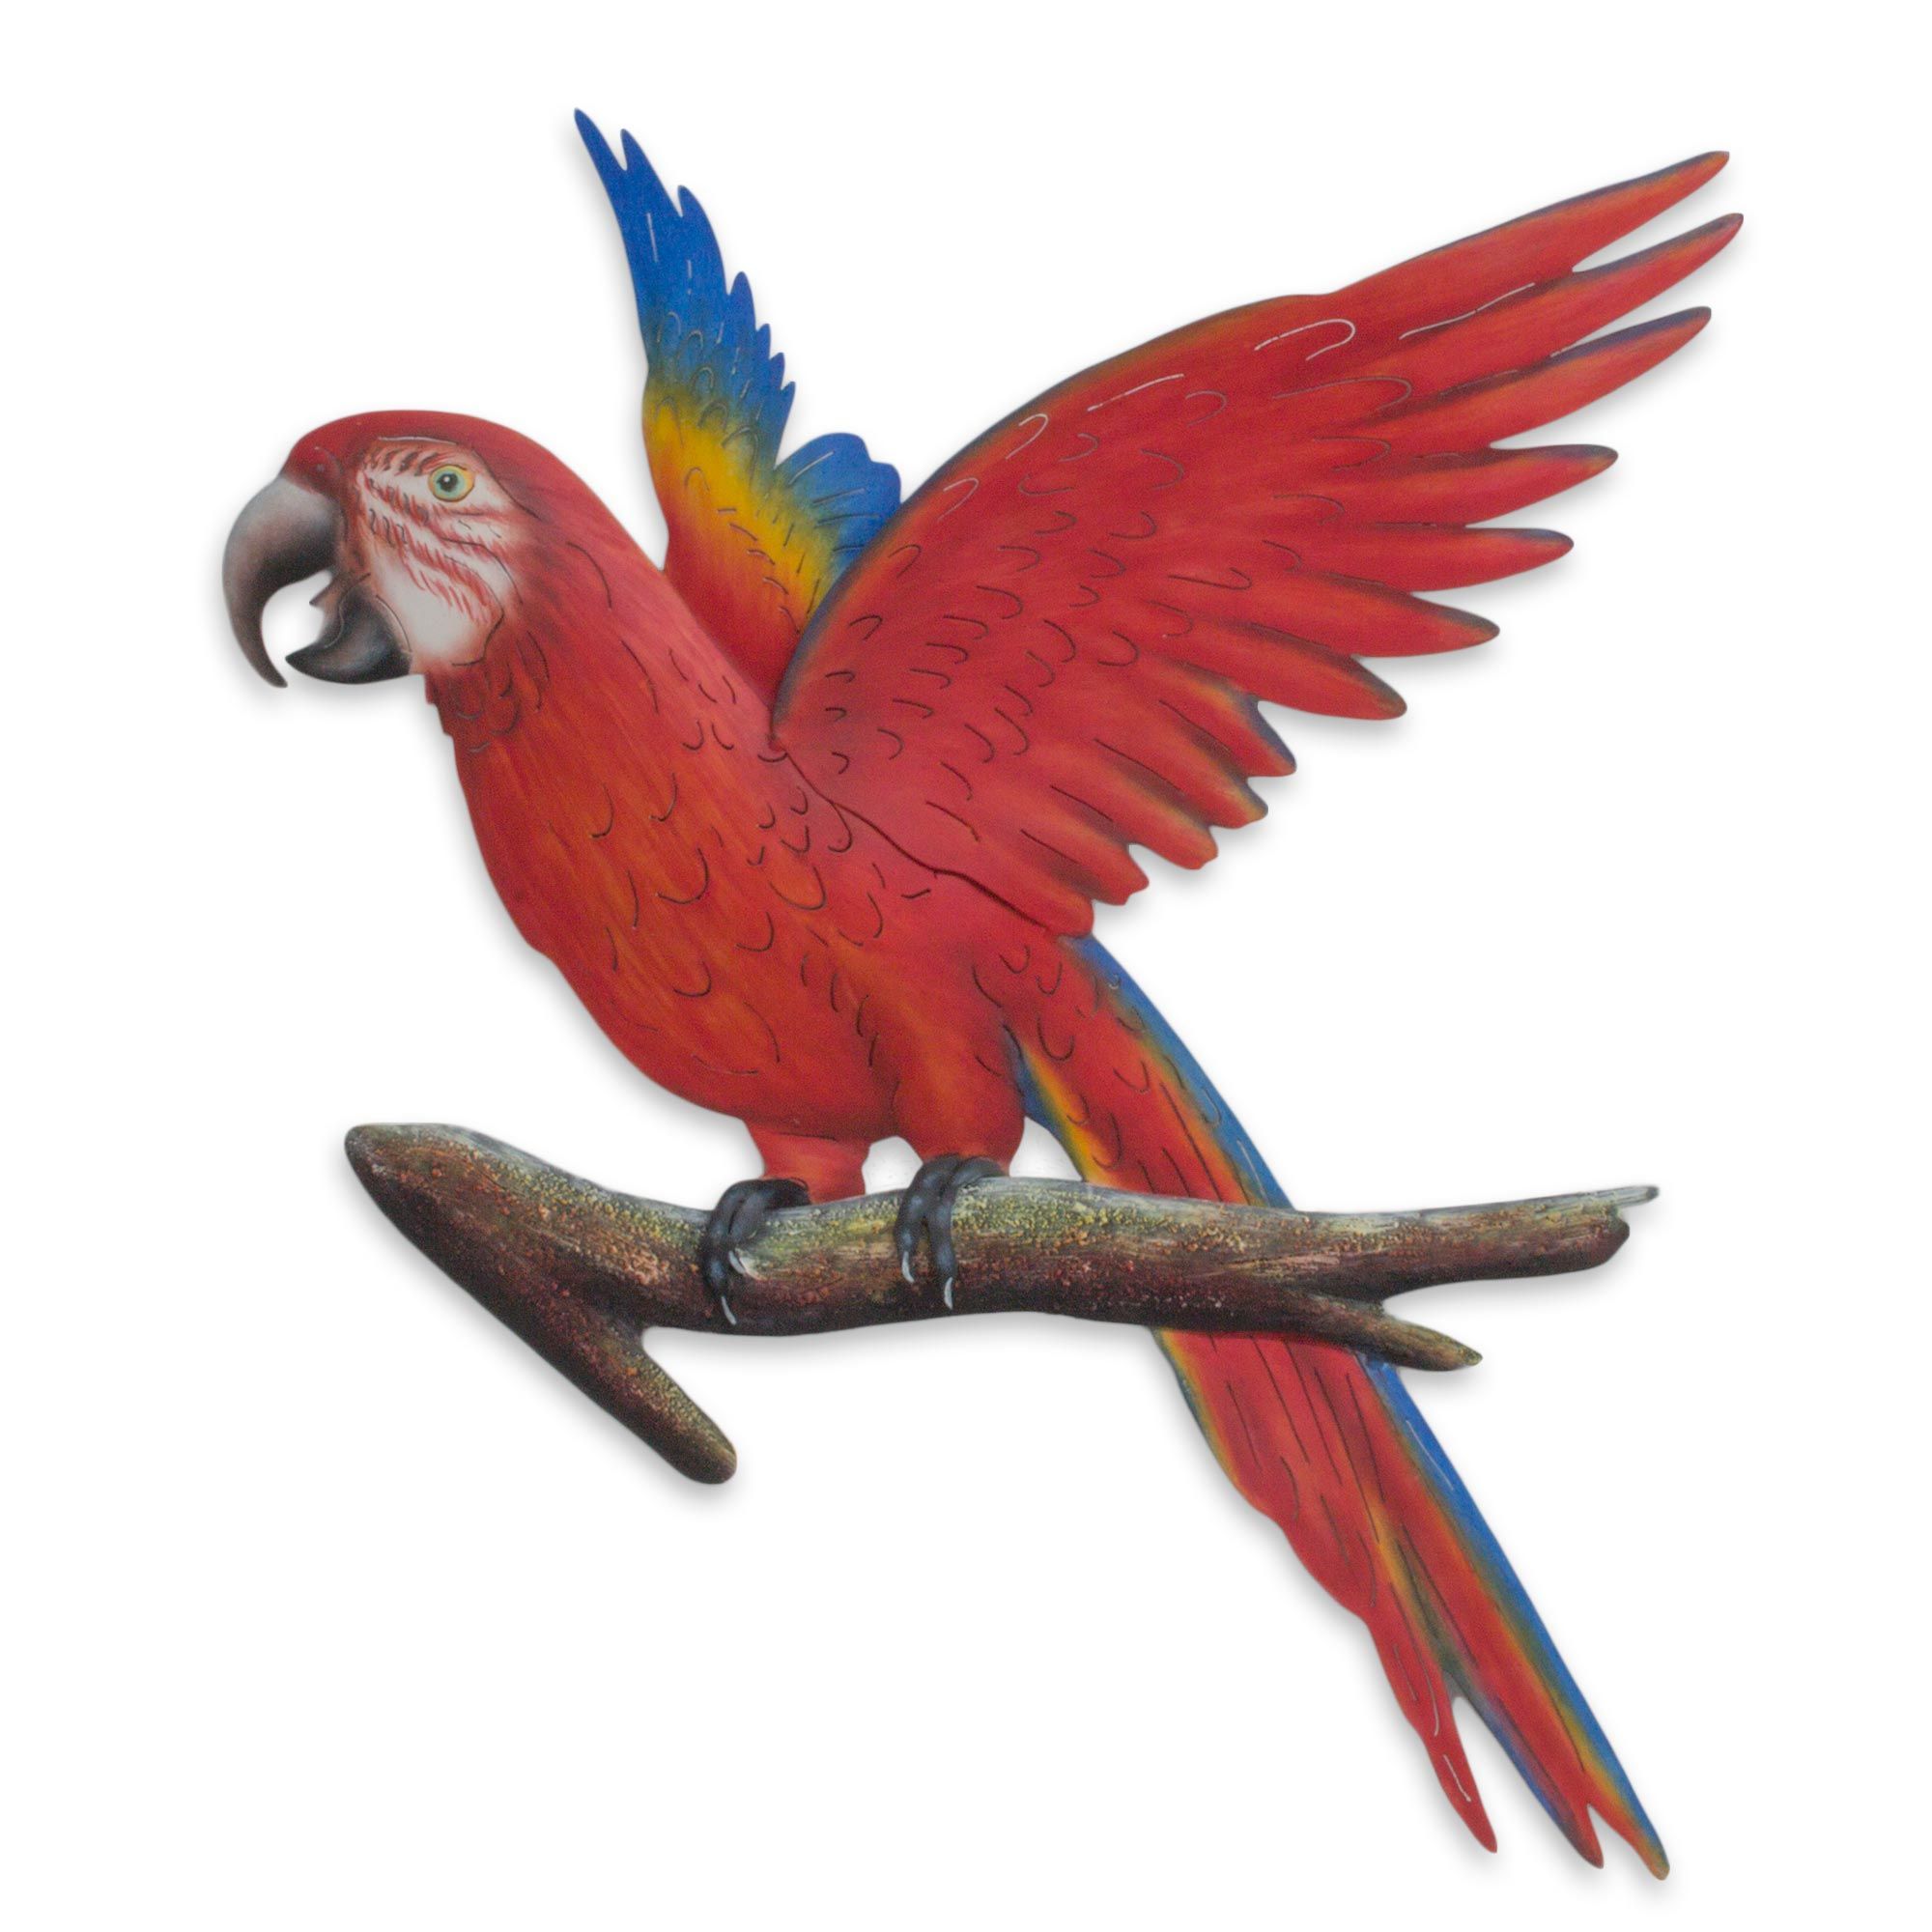 Unicef Market | Handcrafted Red Steel Bird Theme Wall Sculpture From Mexico  – Scarlet Macaw Pertaining To Recent Bird Macaw Wall Sculpture (Gallery 2 of 20)